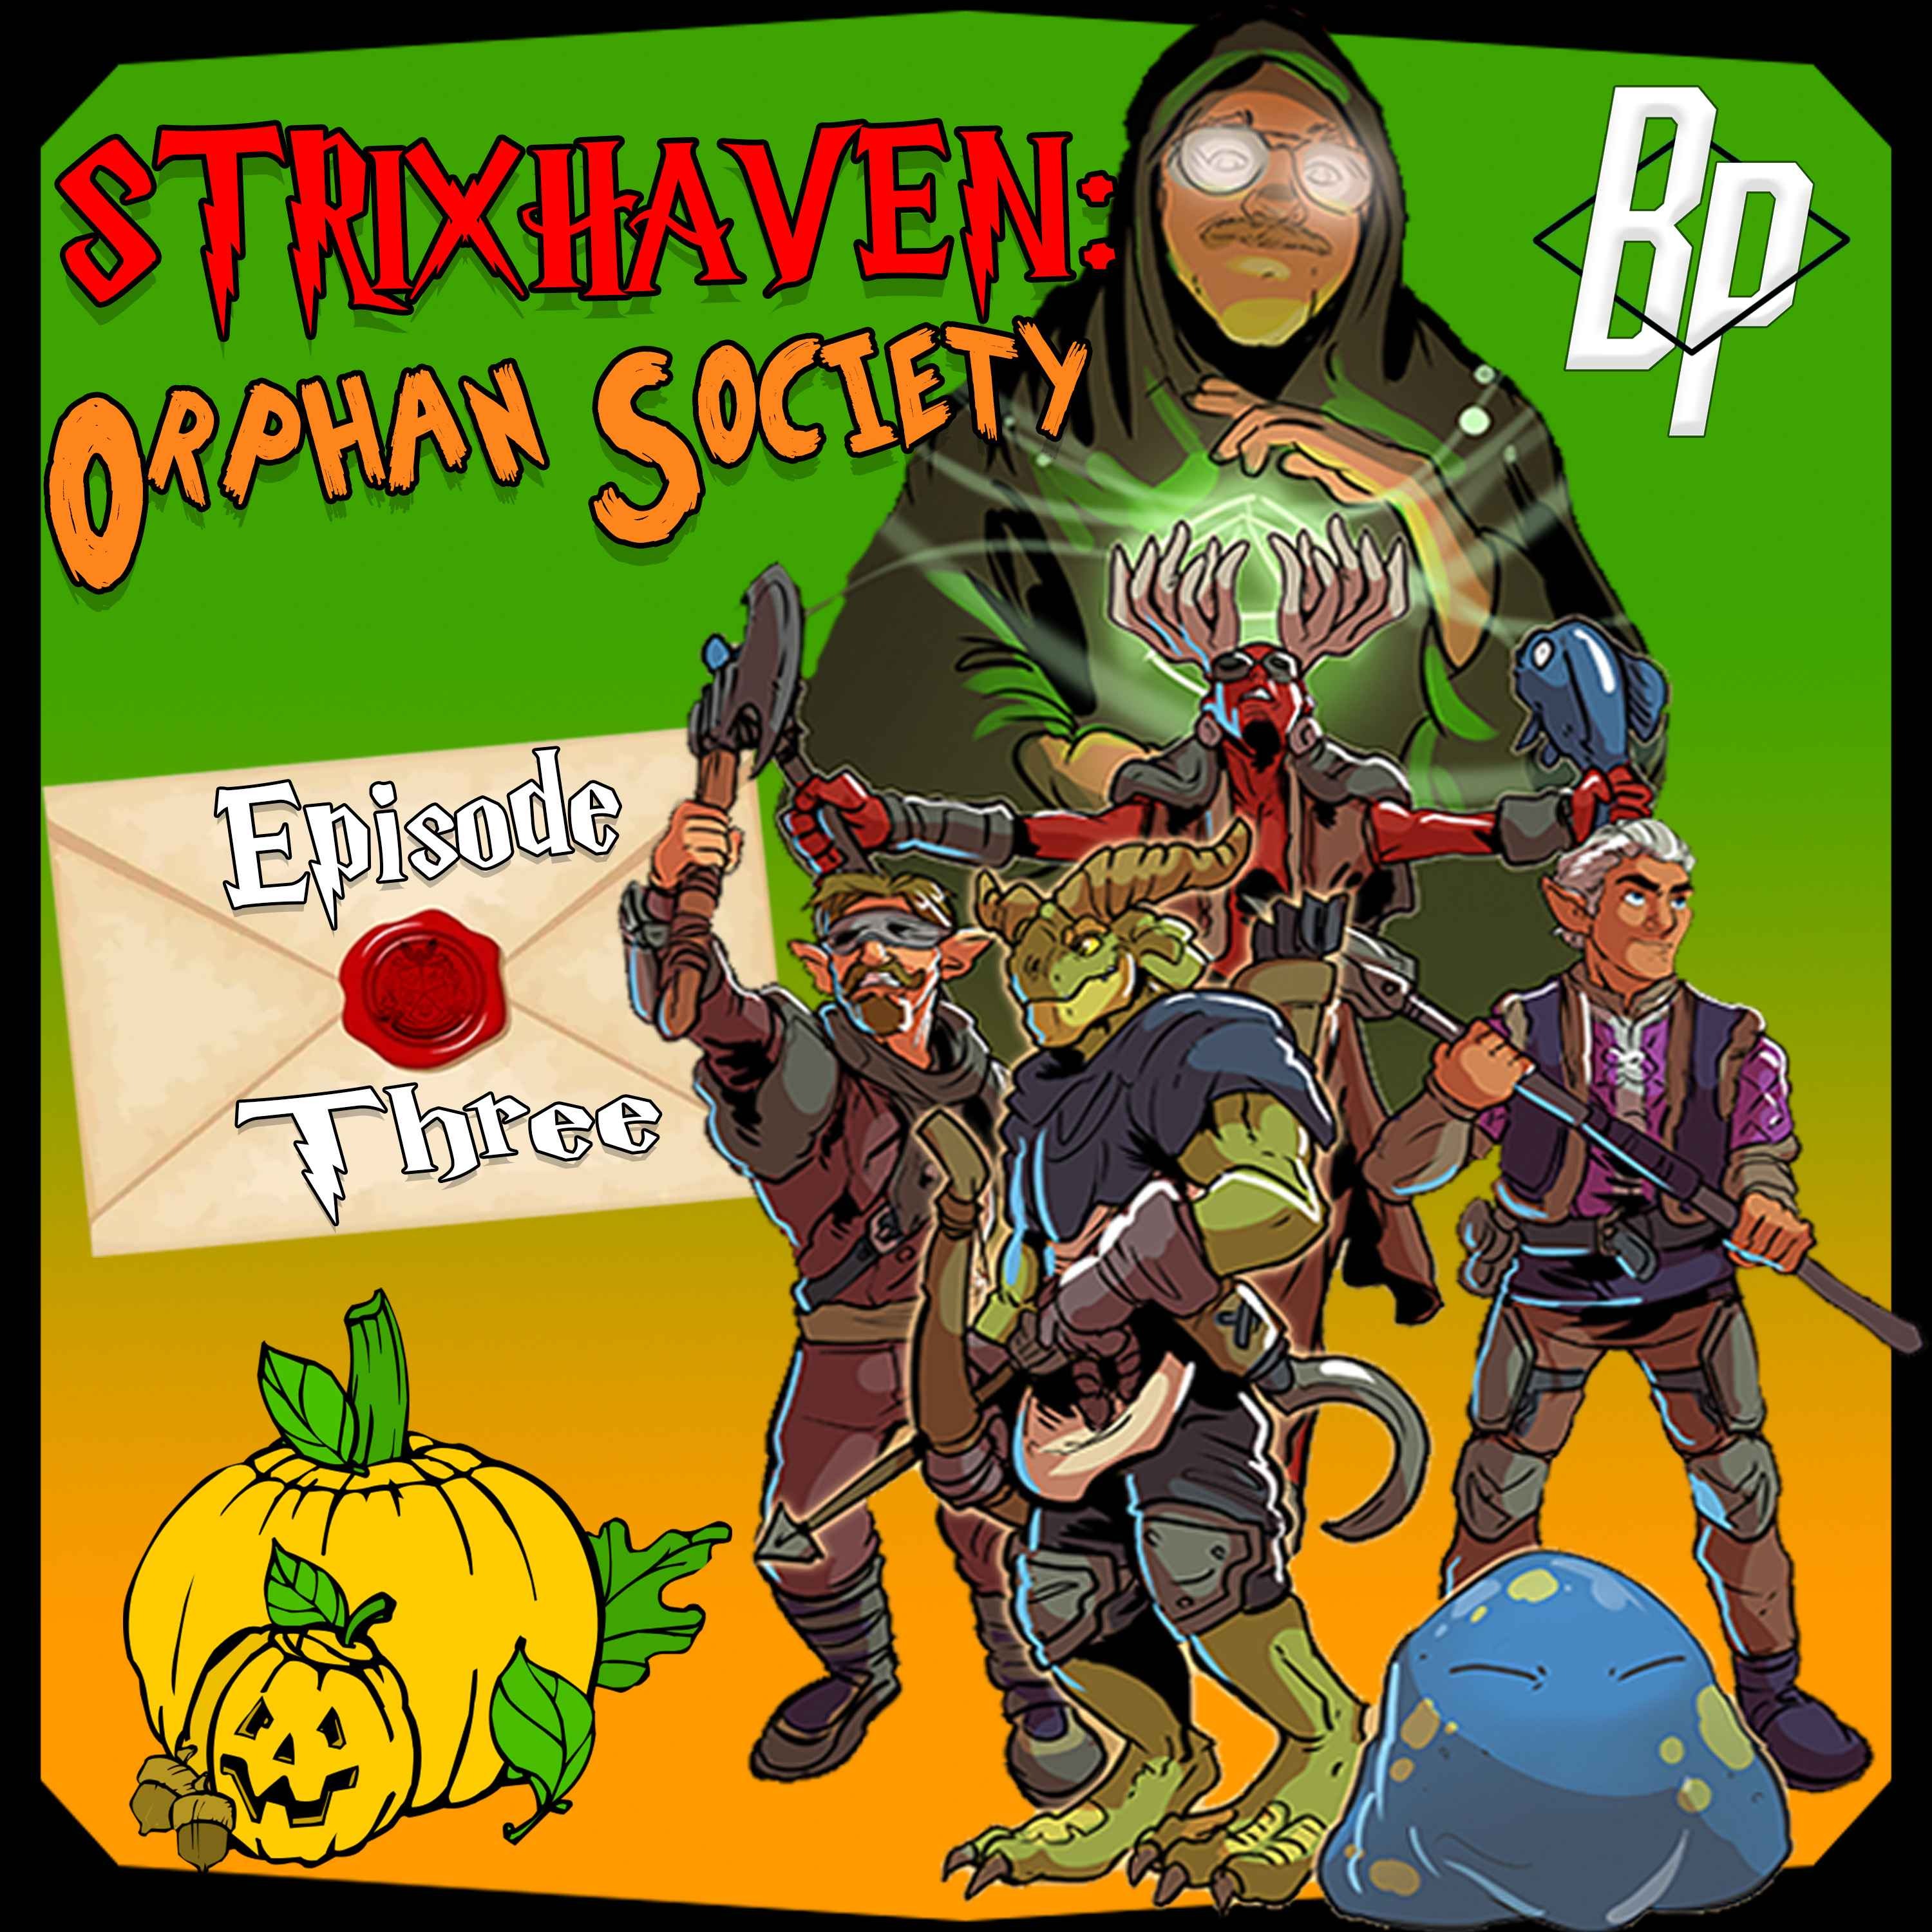 On All Hallows Eve... | Episode 3 | Strixhaven: Orphan Society